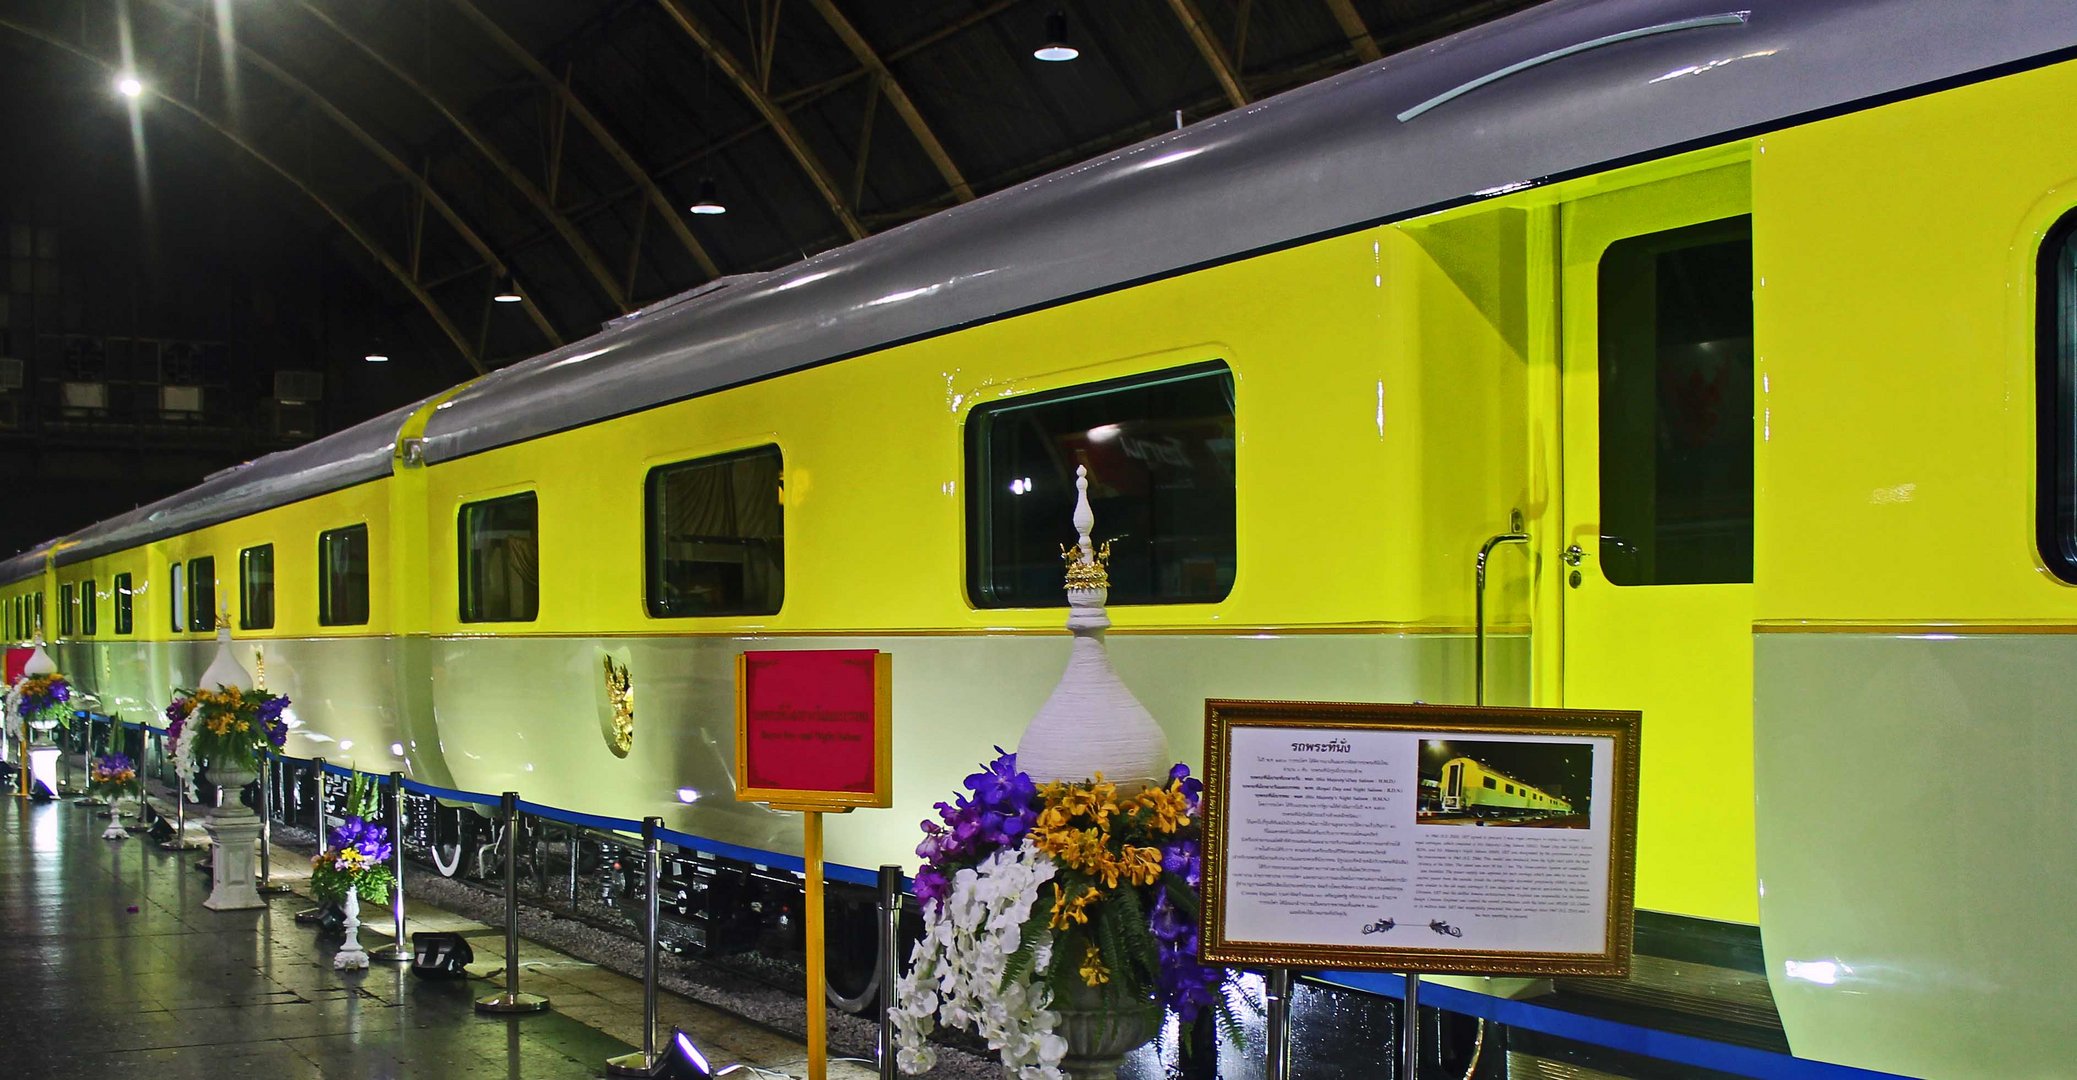 The Royal Train of Thailand